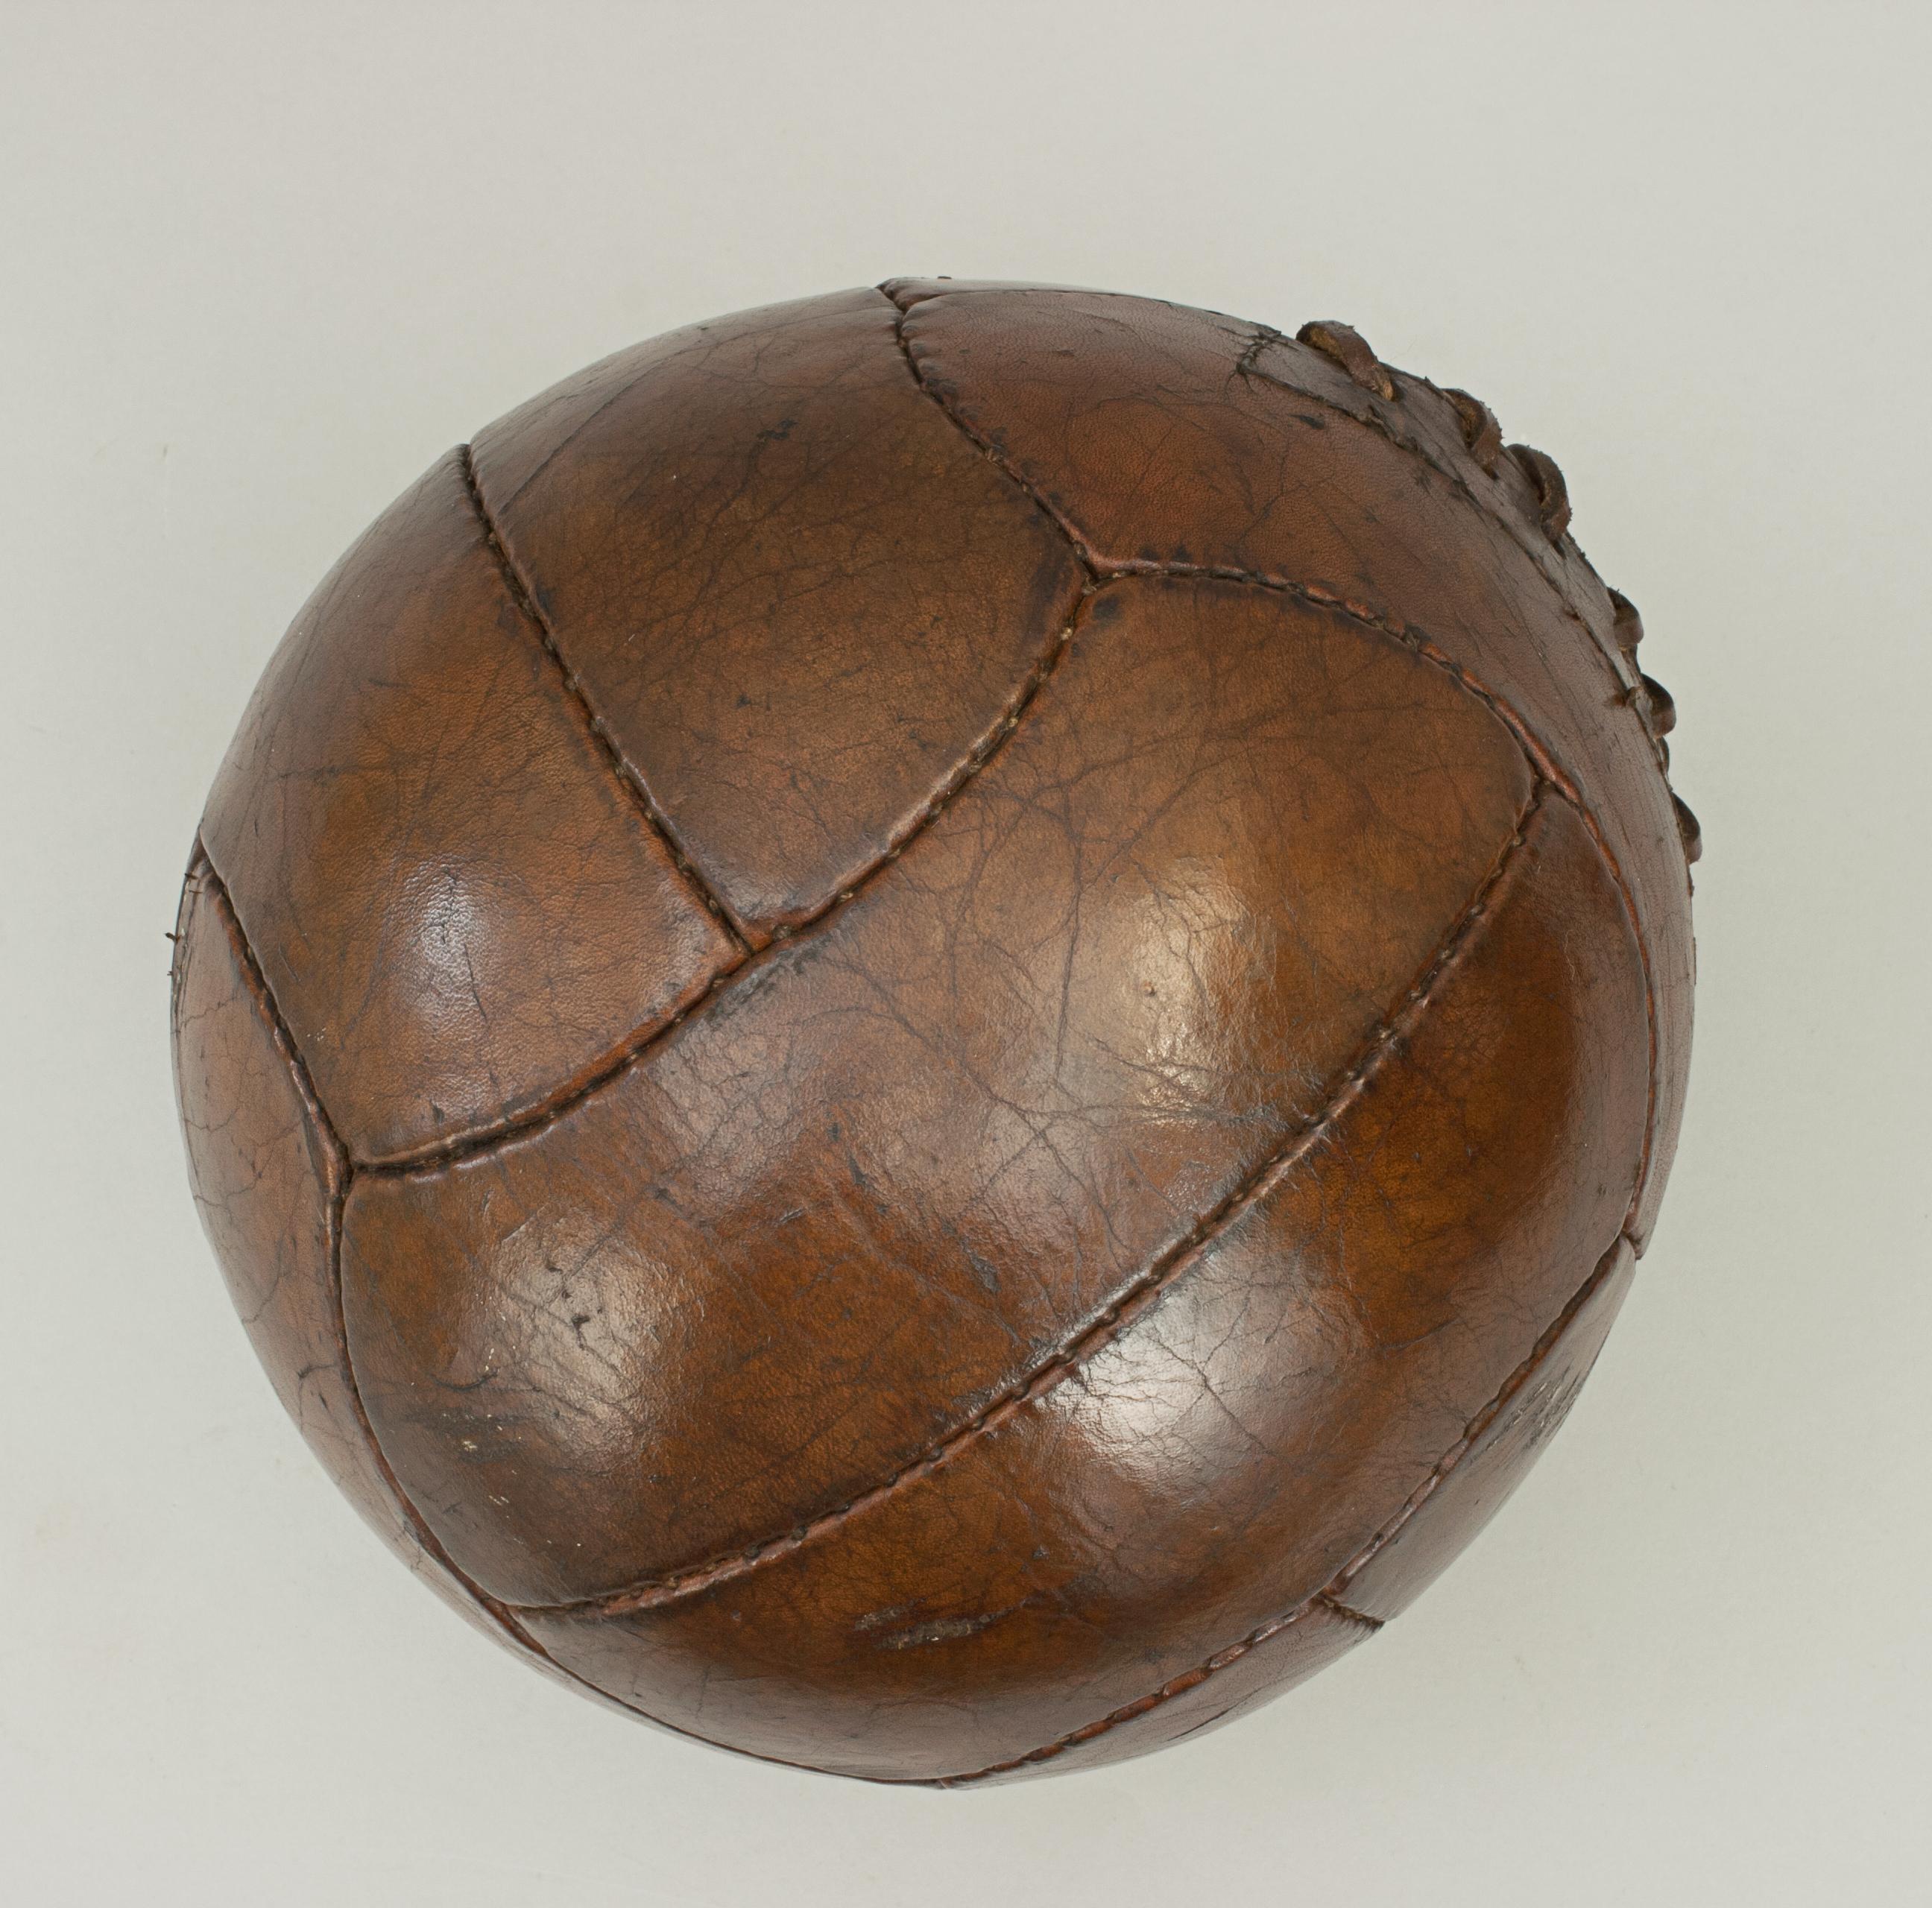 Sporting Art Vintage 1940s Leather Football, Soccer Ball